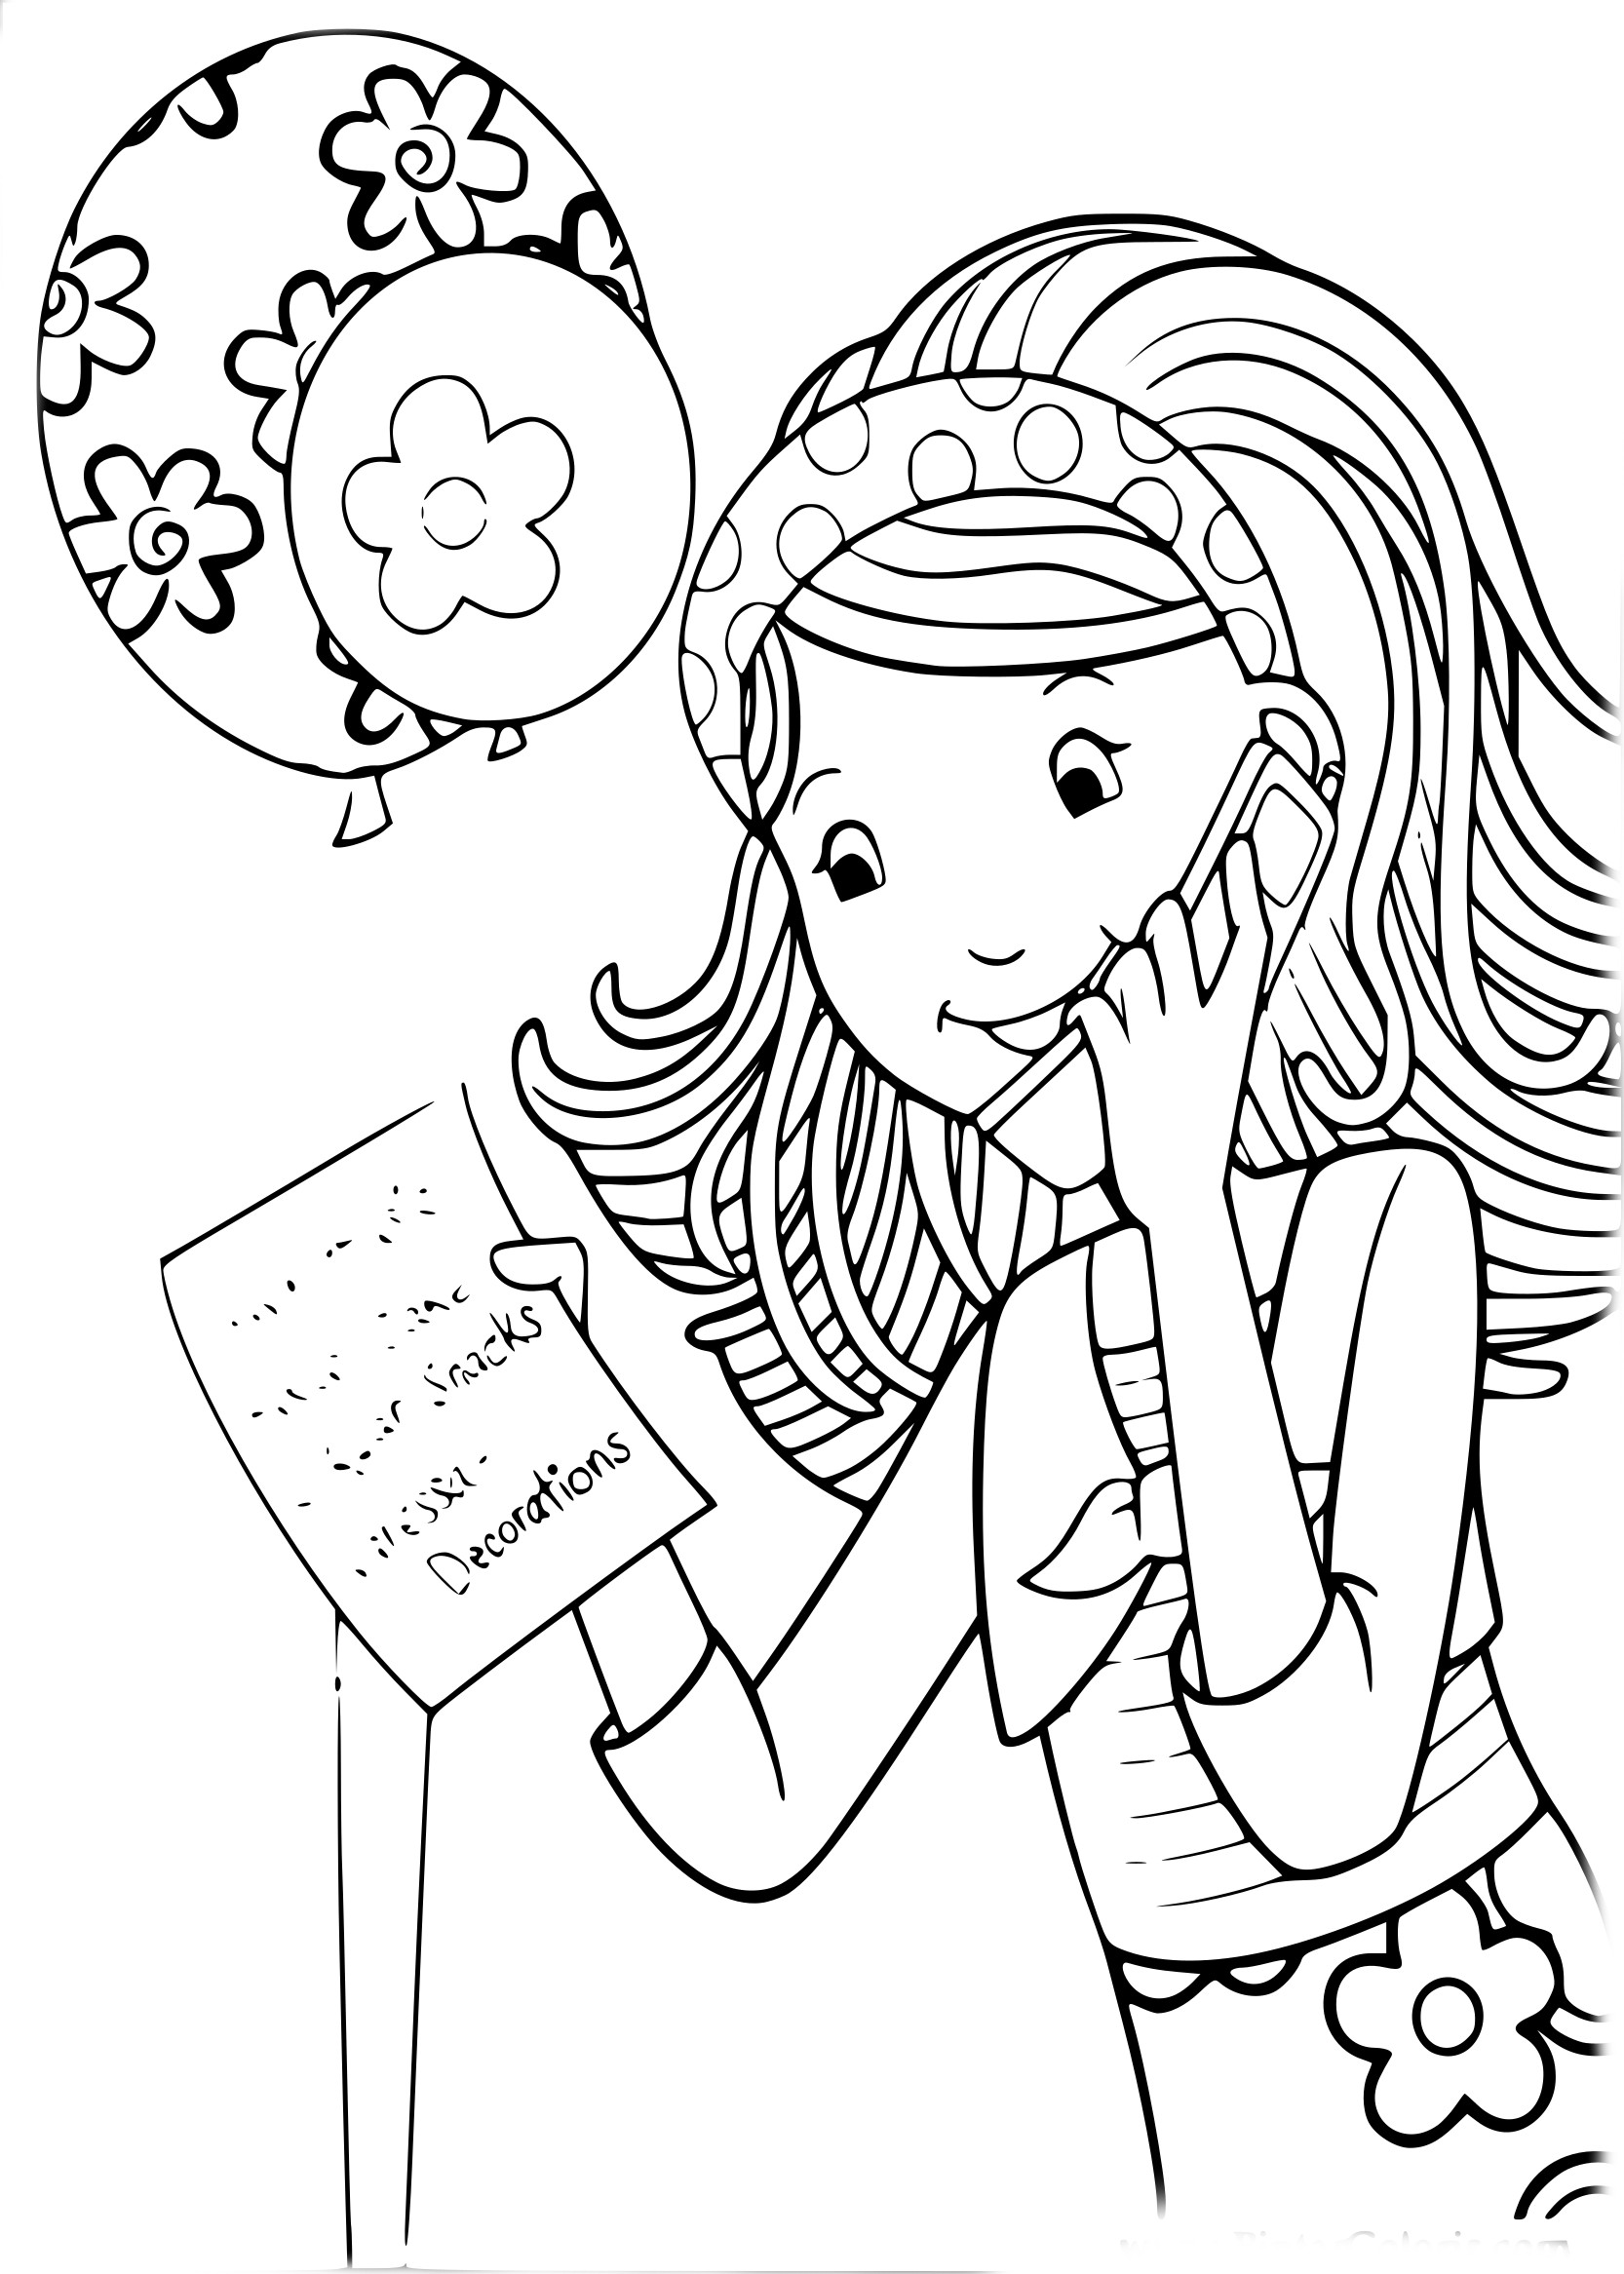 Groovy Girls drawing and coloring page